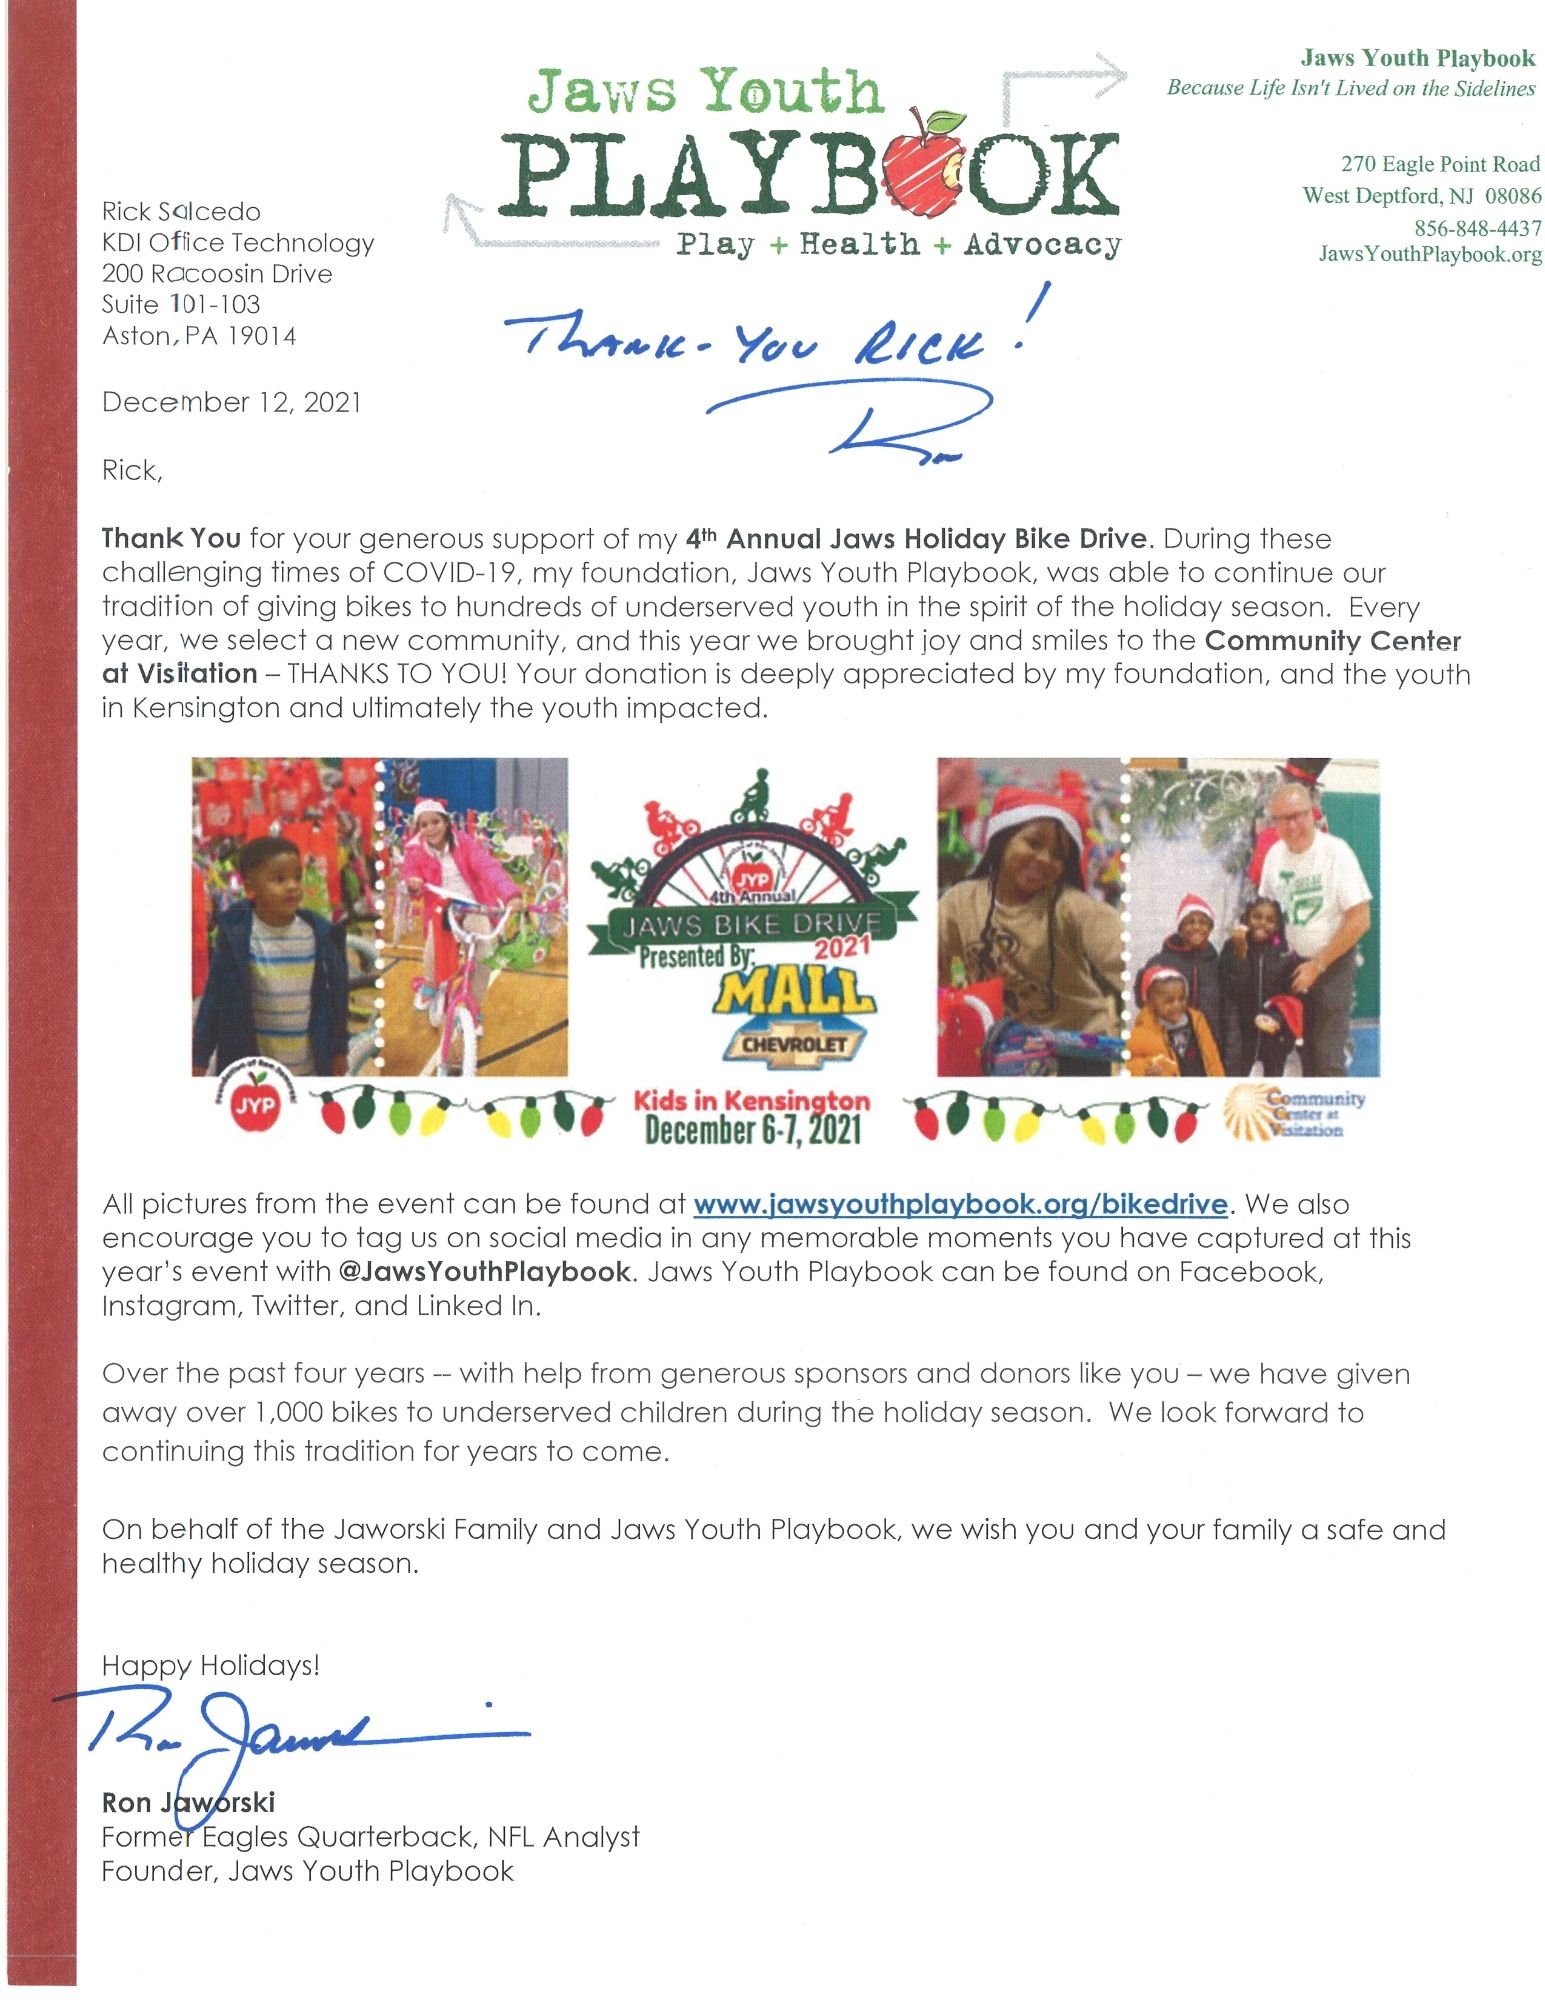 Jaws Youth Playbook letter to the president of KDI thanking the KDI team for the support.